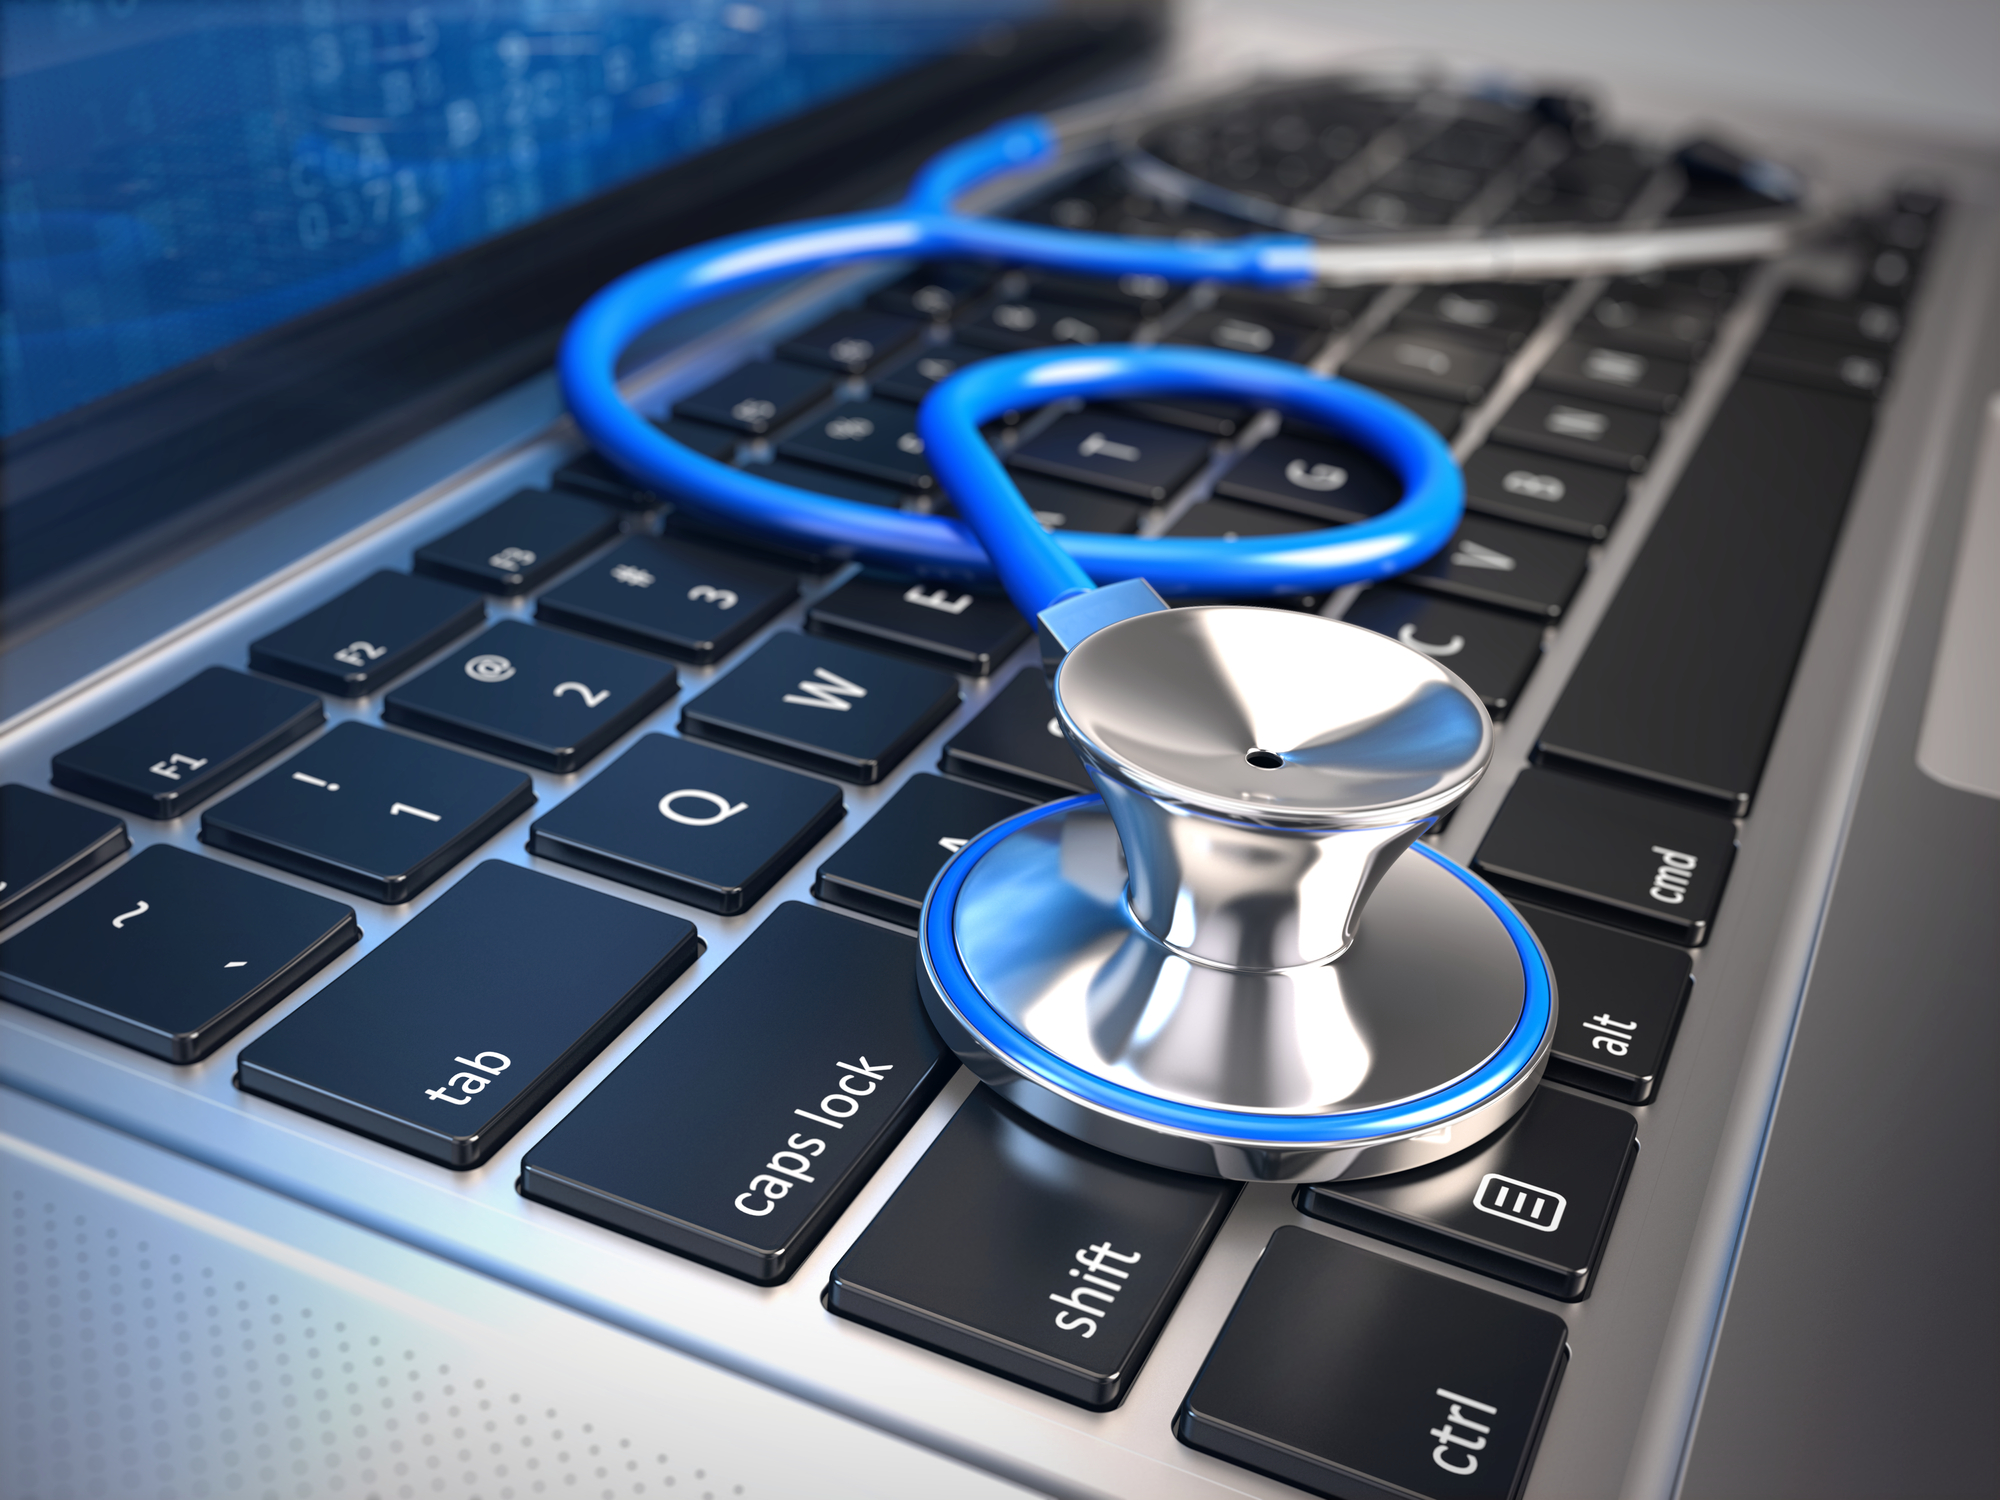 A stethoscope lies on a laptop keyboard, symbolizing it services for healthcare or digital healthcare.